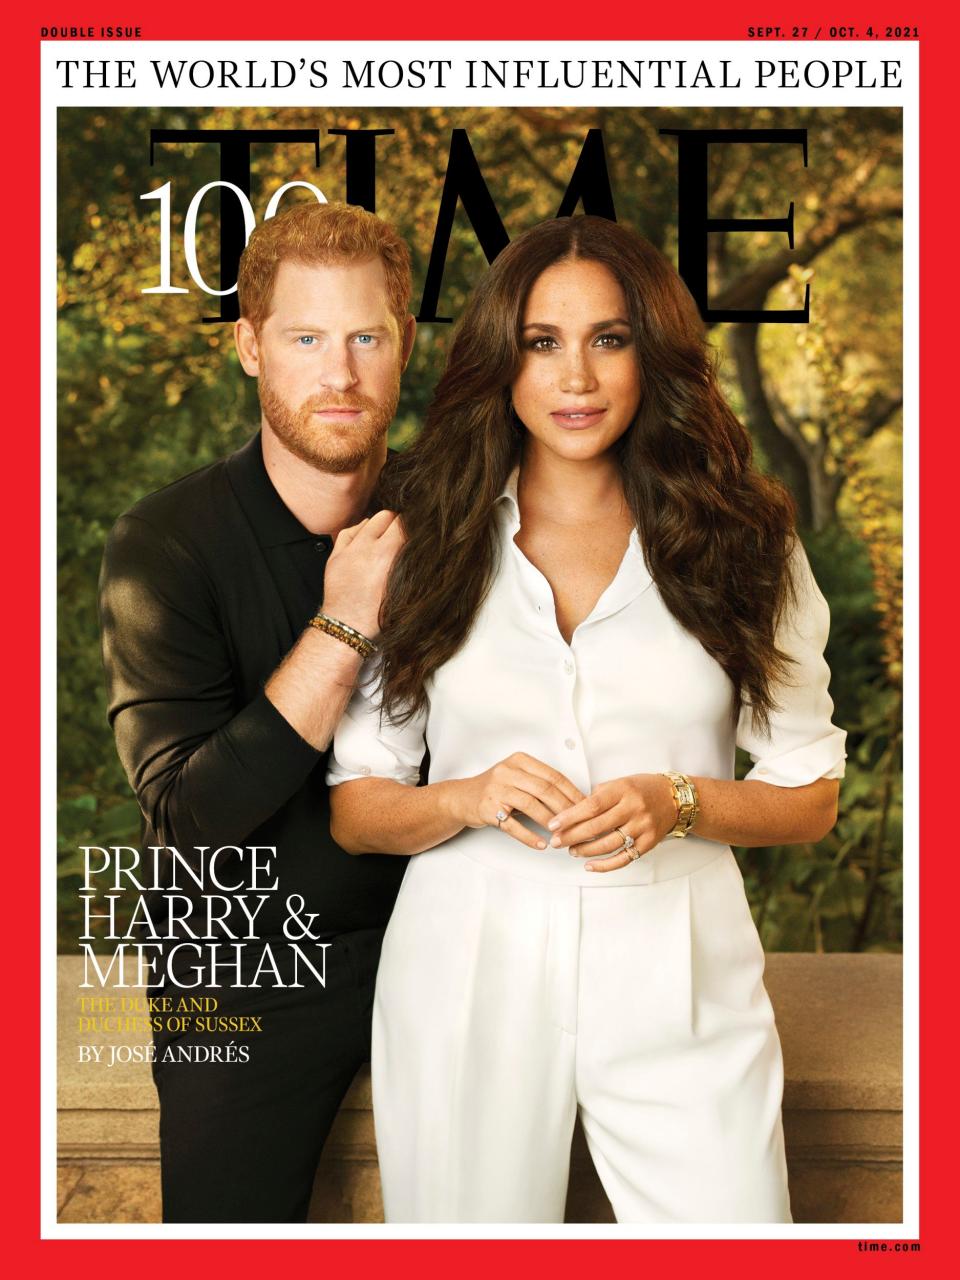 The portrait marks the first time the couple has formally posed for a magazine shoot cover together - TIME 100